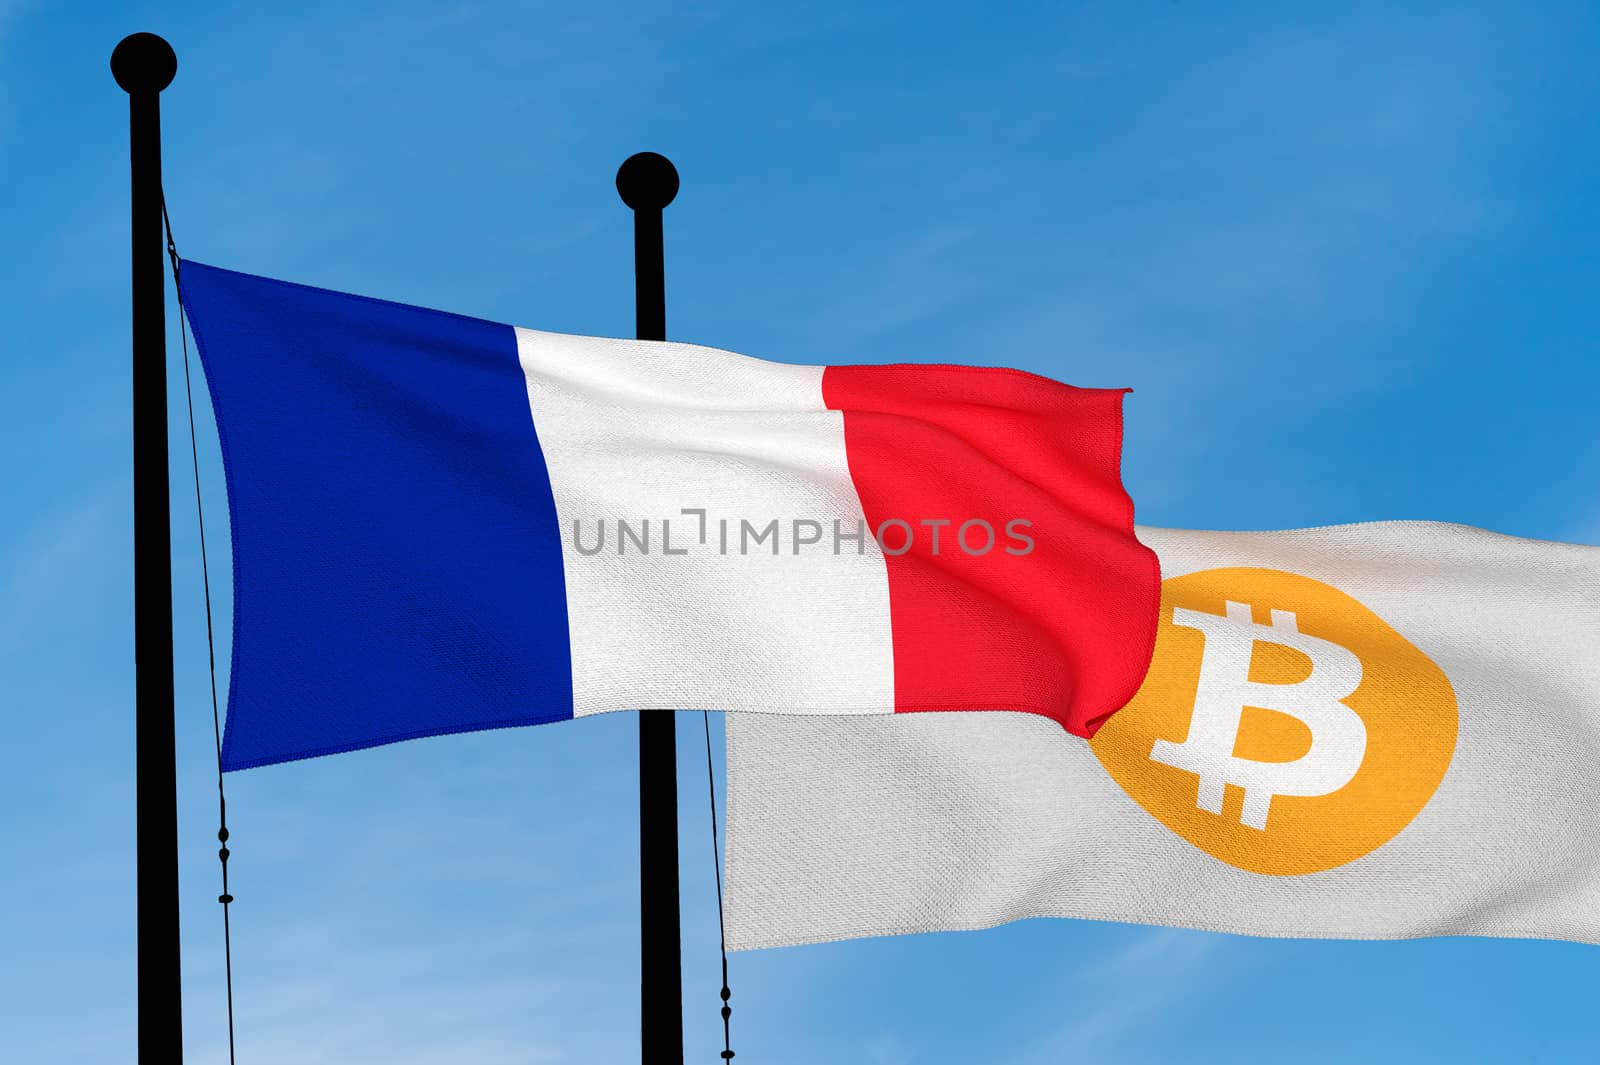 French flag and Bitcoin Flag waving over blue sky (3D rendering)